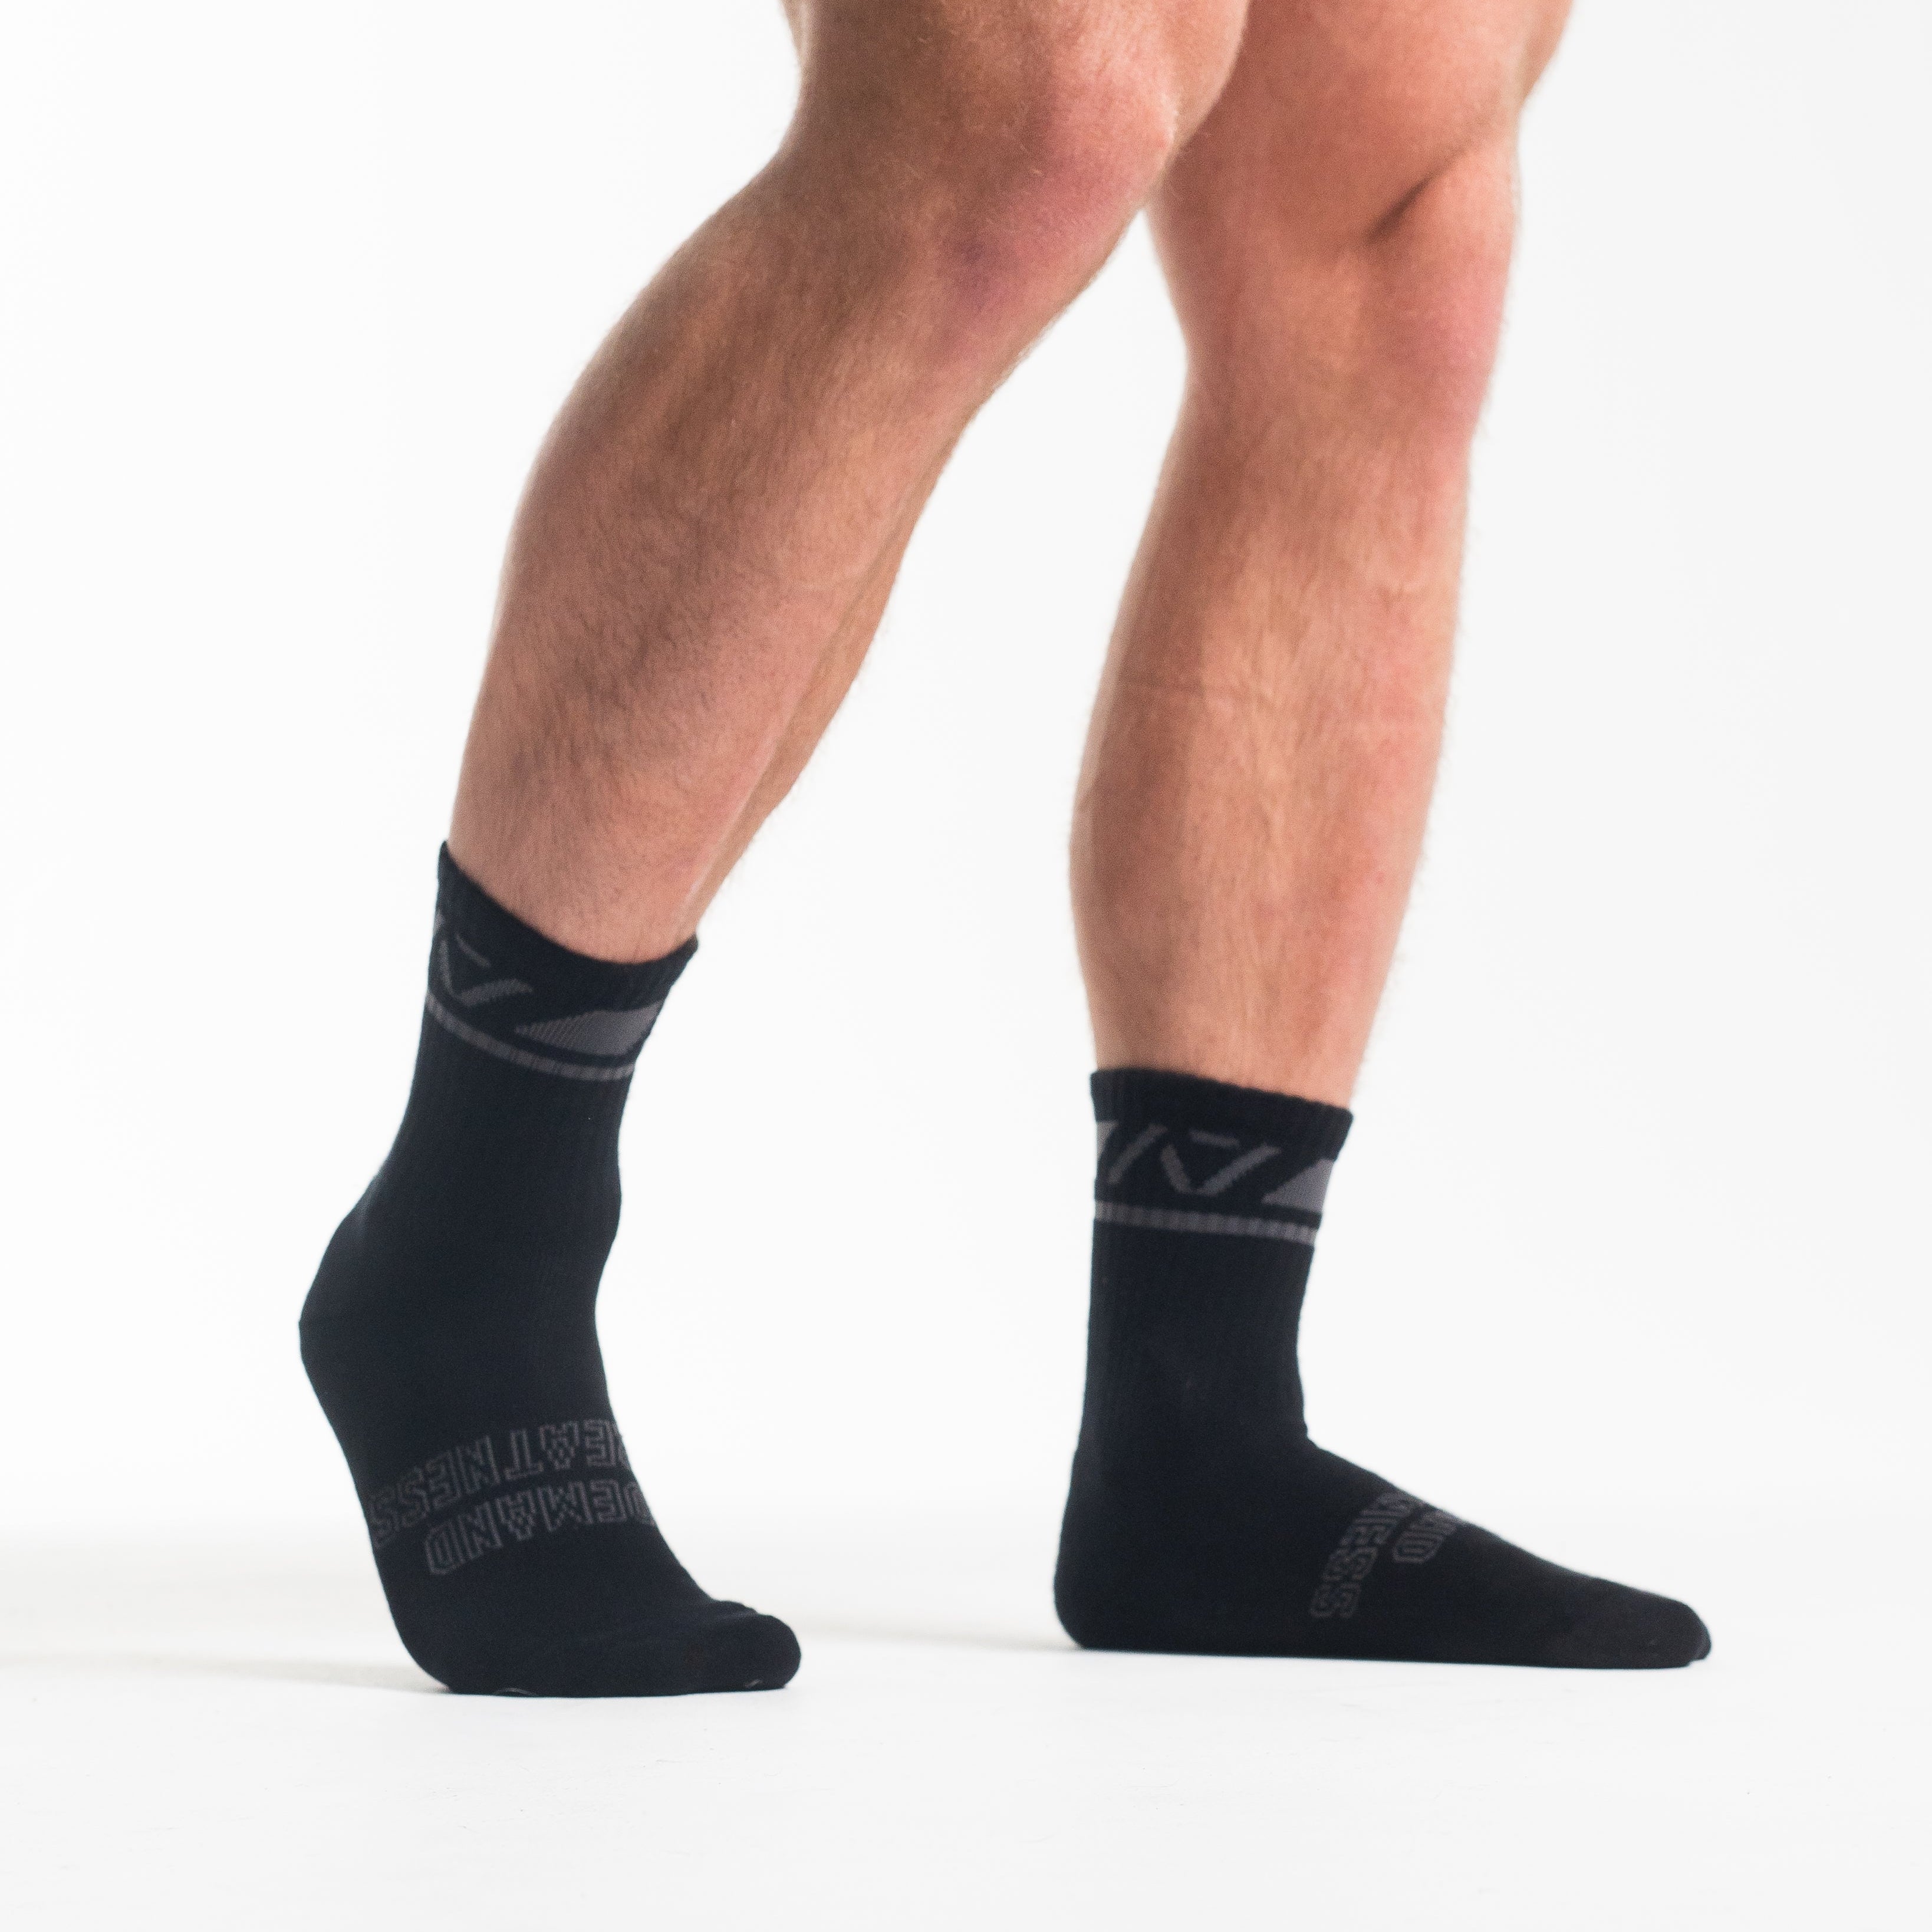 A7 Shadow Stone Crew socks showcase dark grey logos to keep contrast at a minimum and let your energy show on the platform, in your training or while out and about. The IPF Approved Shadow Stone Meet Kit includes Powerlifting Singlet, A7 Meet Shirt, A7 Zebra Wrist Wraps, A7 Deadlift Socks, Hourglass Knee Sleeves (Stiff Knee Sleeves and Rigor Mortis Knee Sleeves). Genouillères powerlifting shipping to France, Spain, Ireland, Germany, Italy, Sweden and EU. 